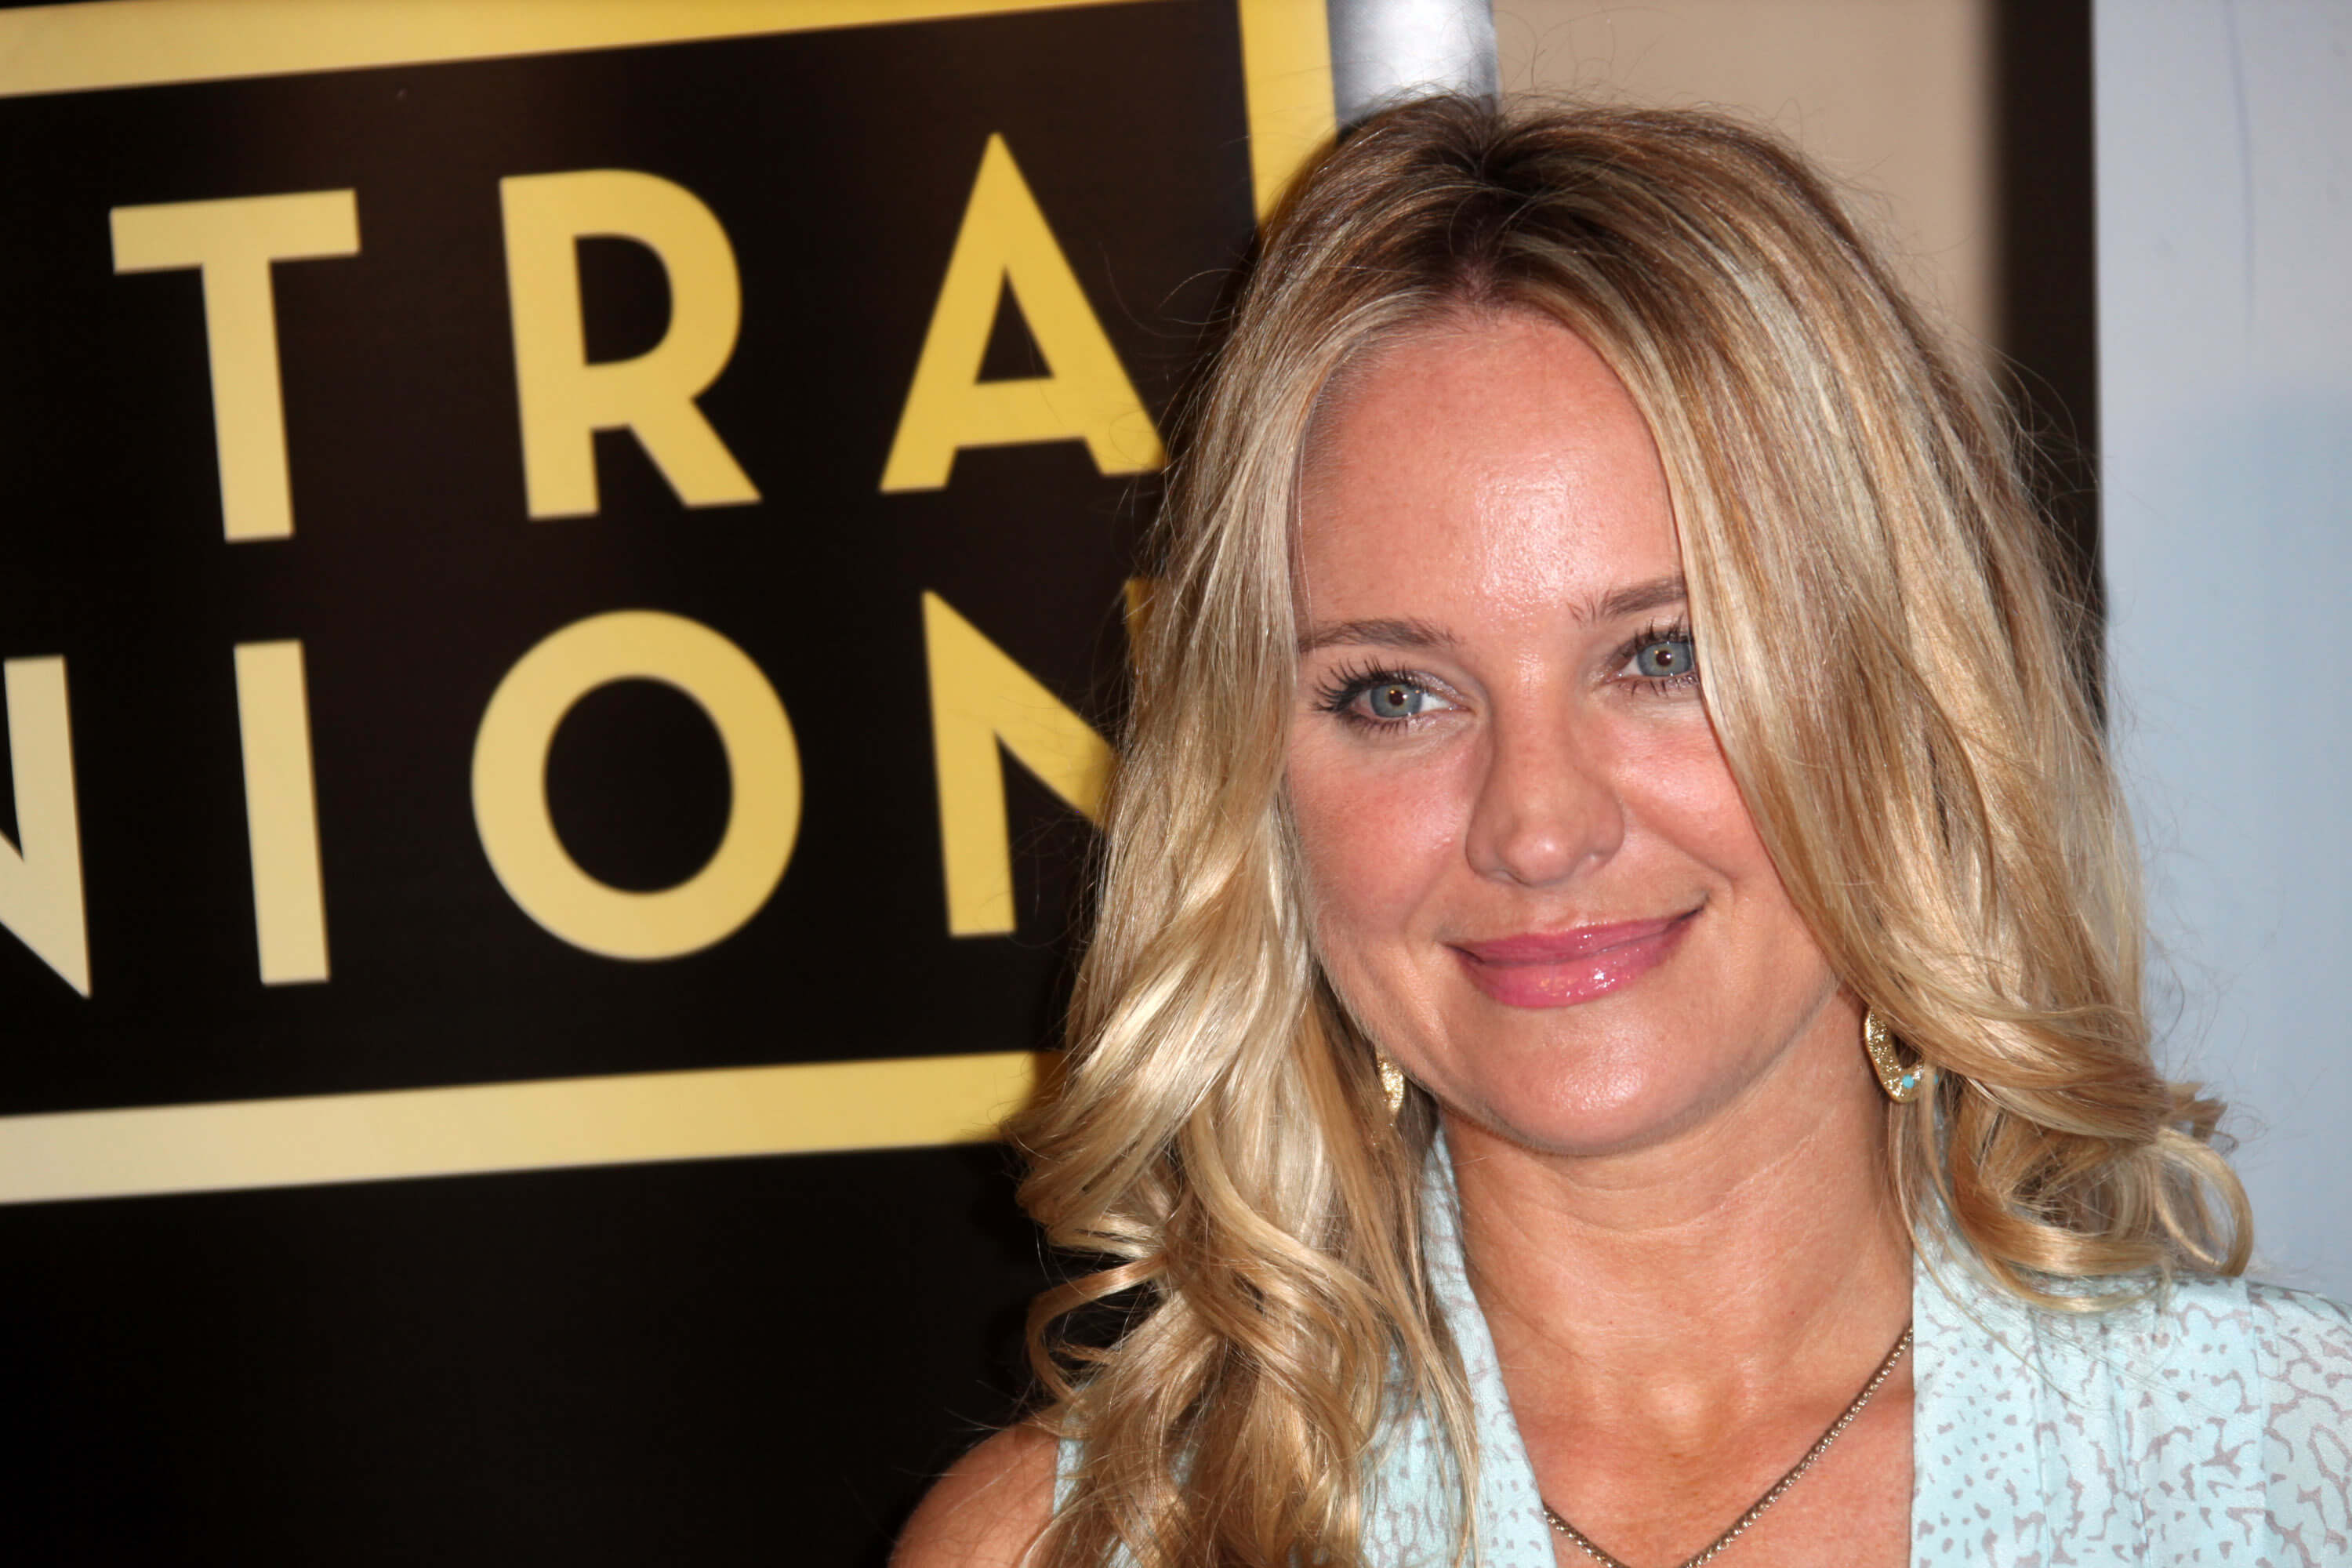 'The Young and the Restless' star Sharon Case dressed in a white outfit; smiling for a red carpet photo.